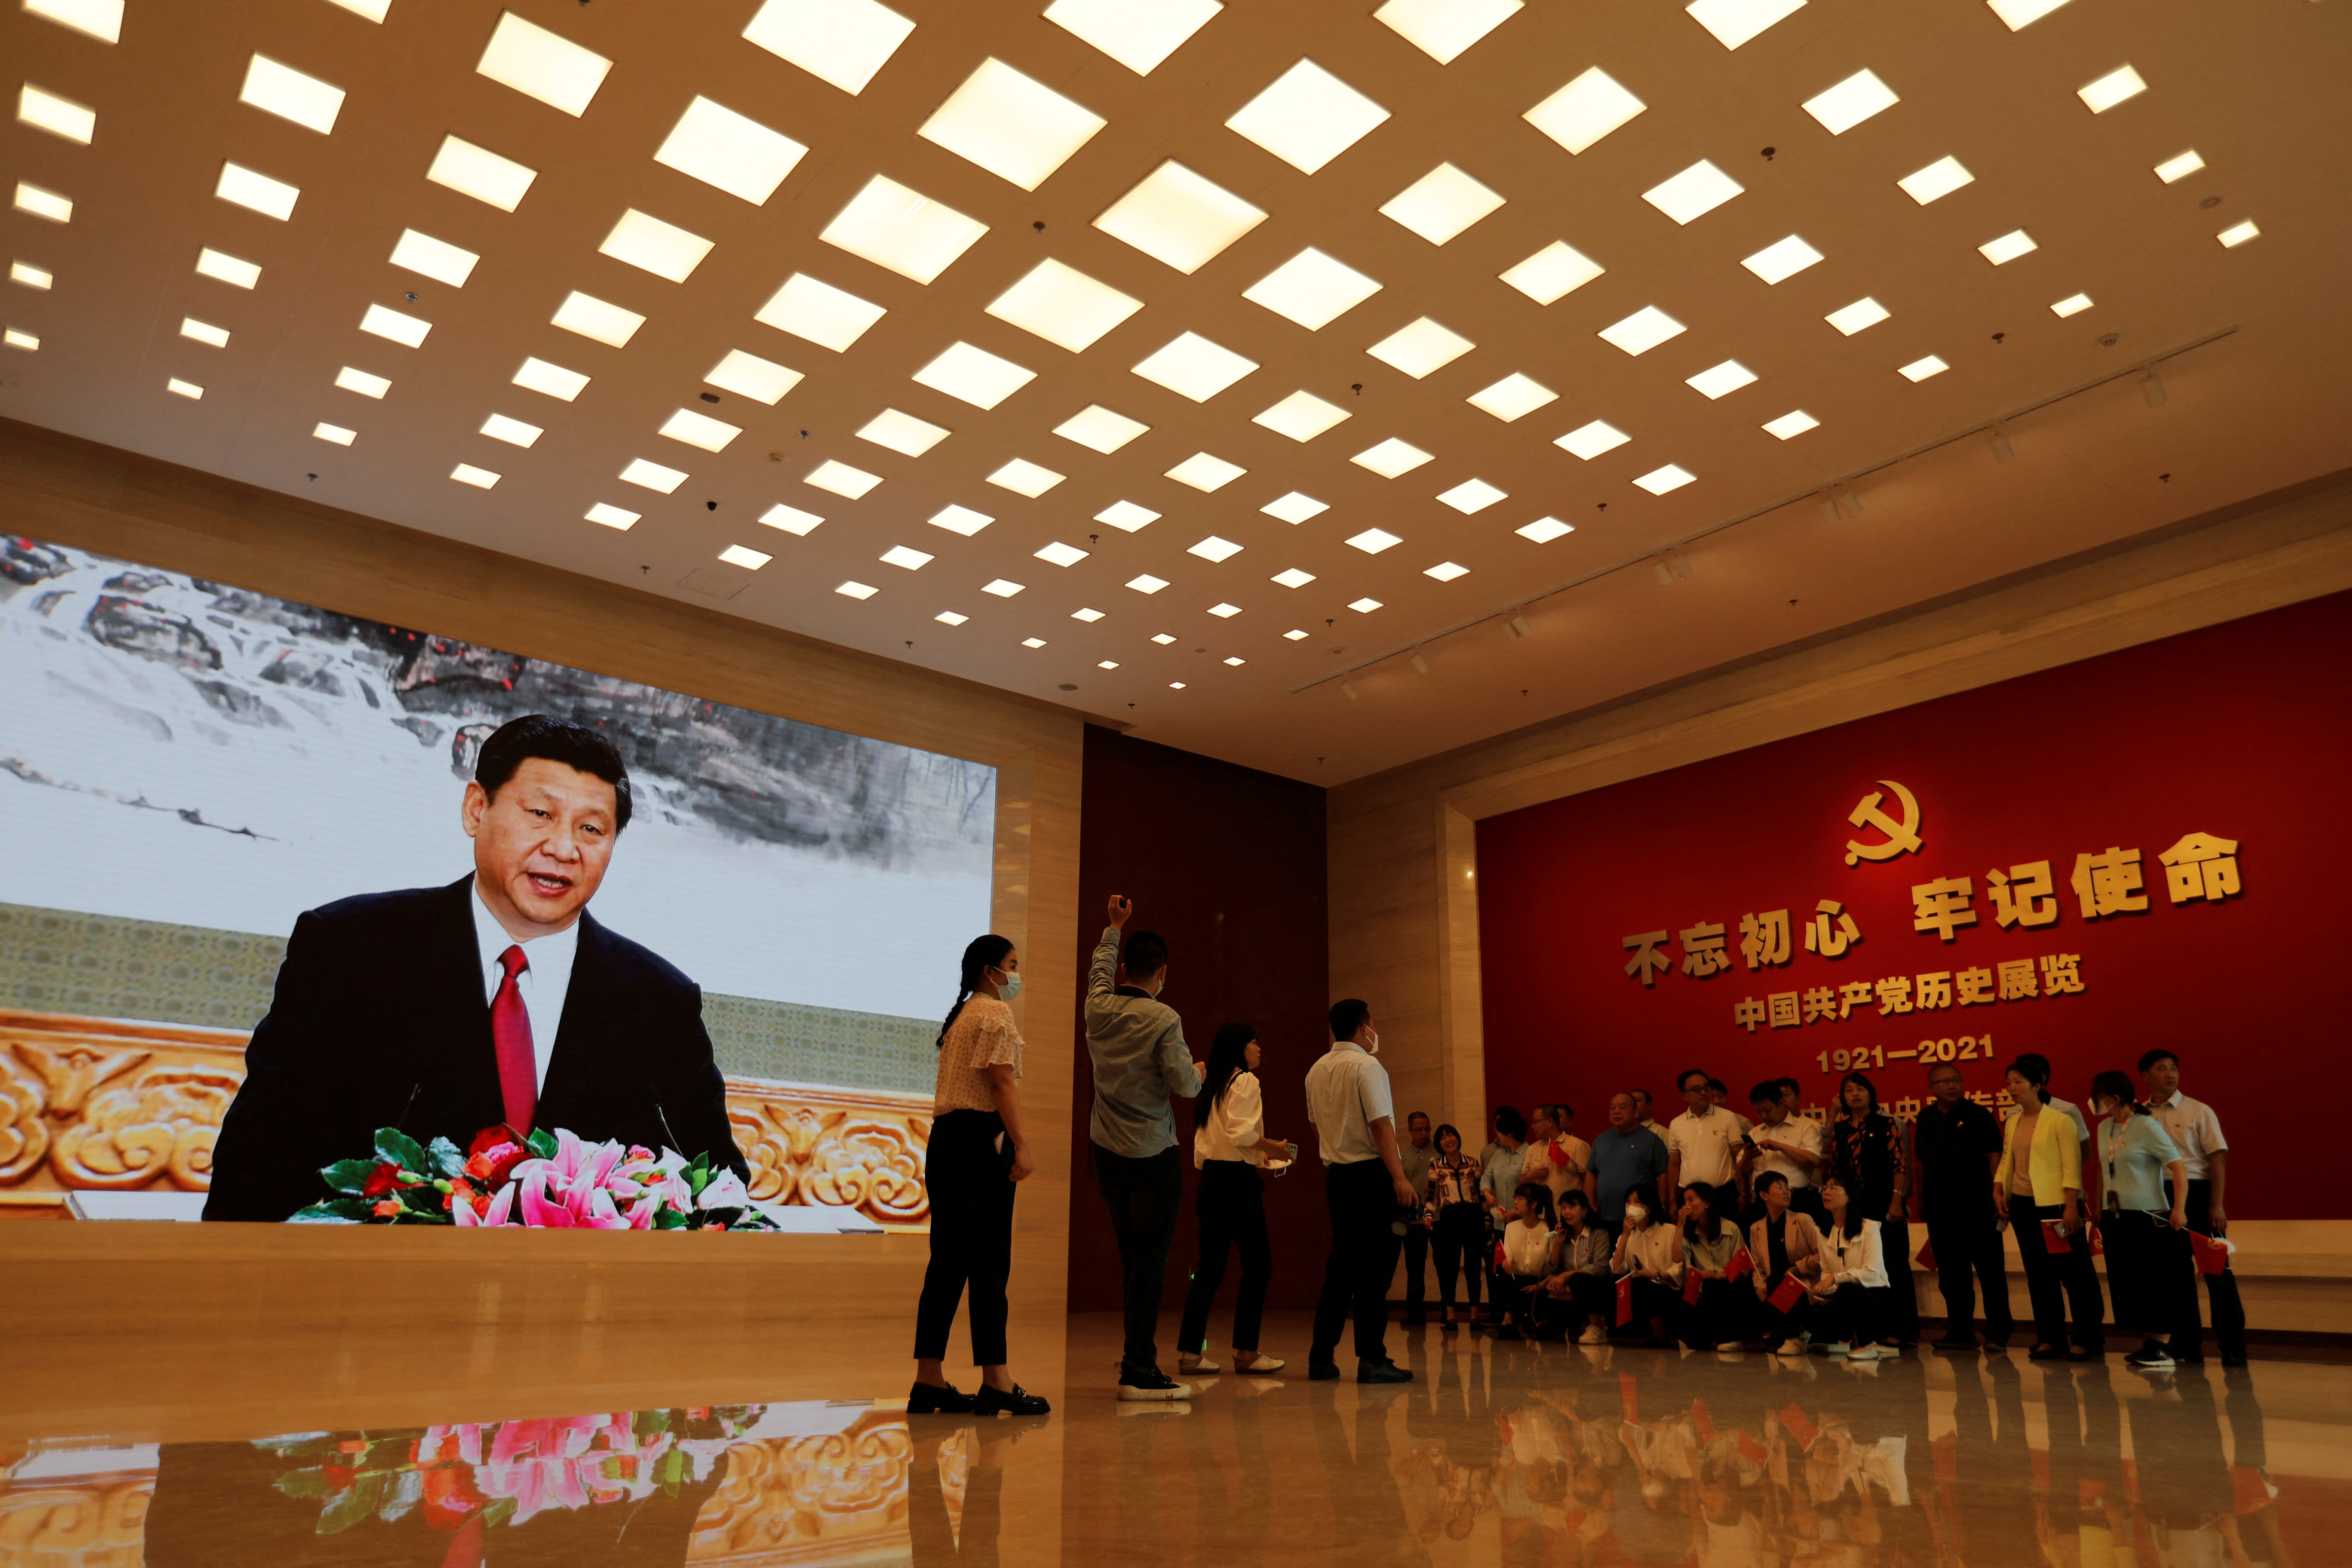 Visitors prepare for a group photo near a screen displaying an image of Chinese President Xi Jinping at the Museum of the Communist Party of China in Beijing, China September 3, 2022. REUTERS/Florence Lo